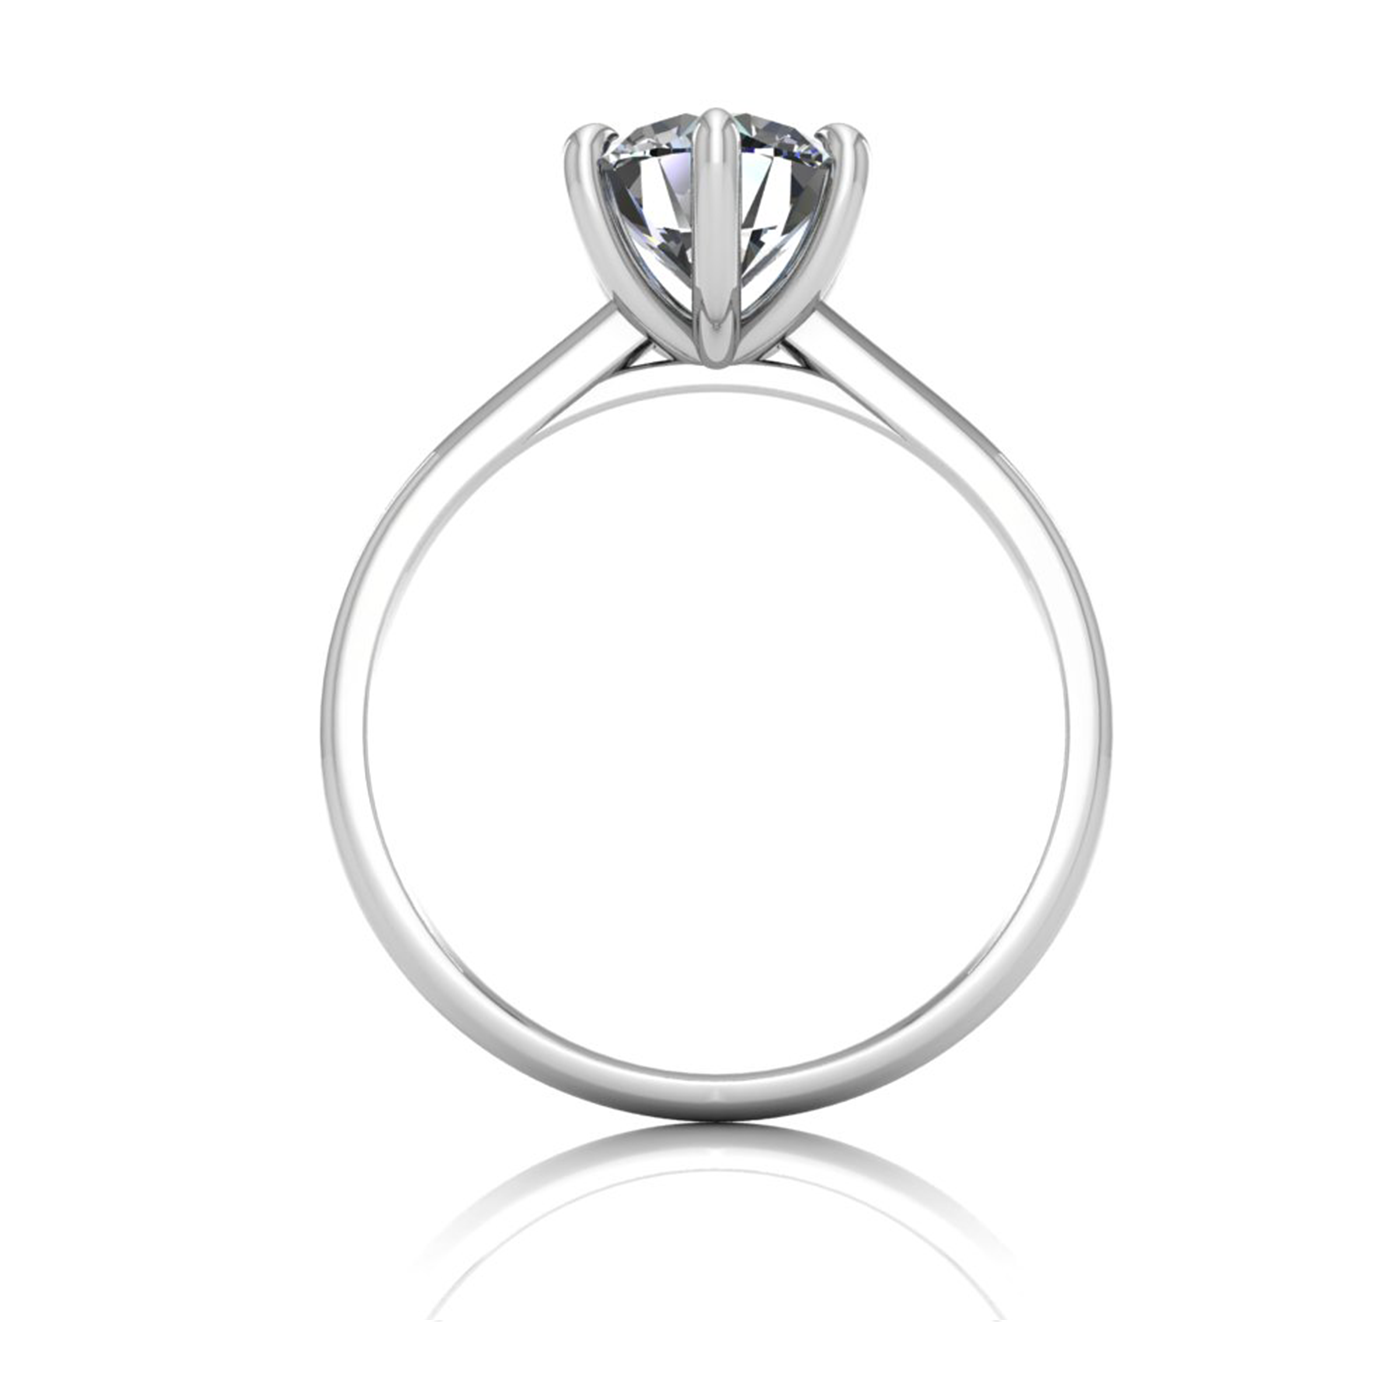 18k white gold 1,50 ct 6 prongs solitaire round cut diamond engagement ring with whisper thin band